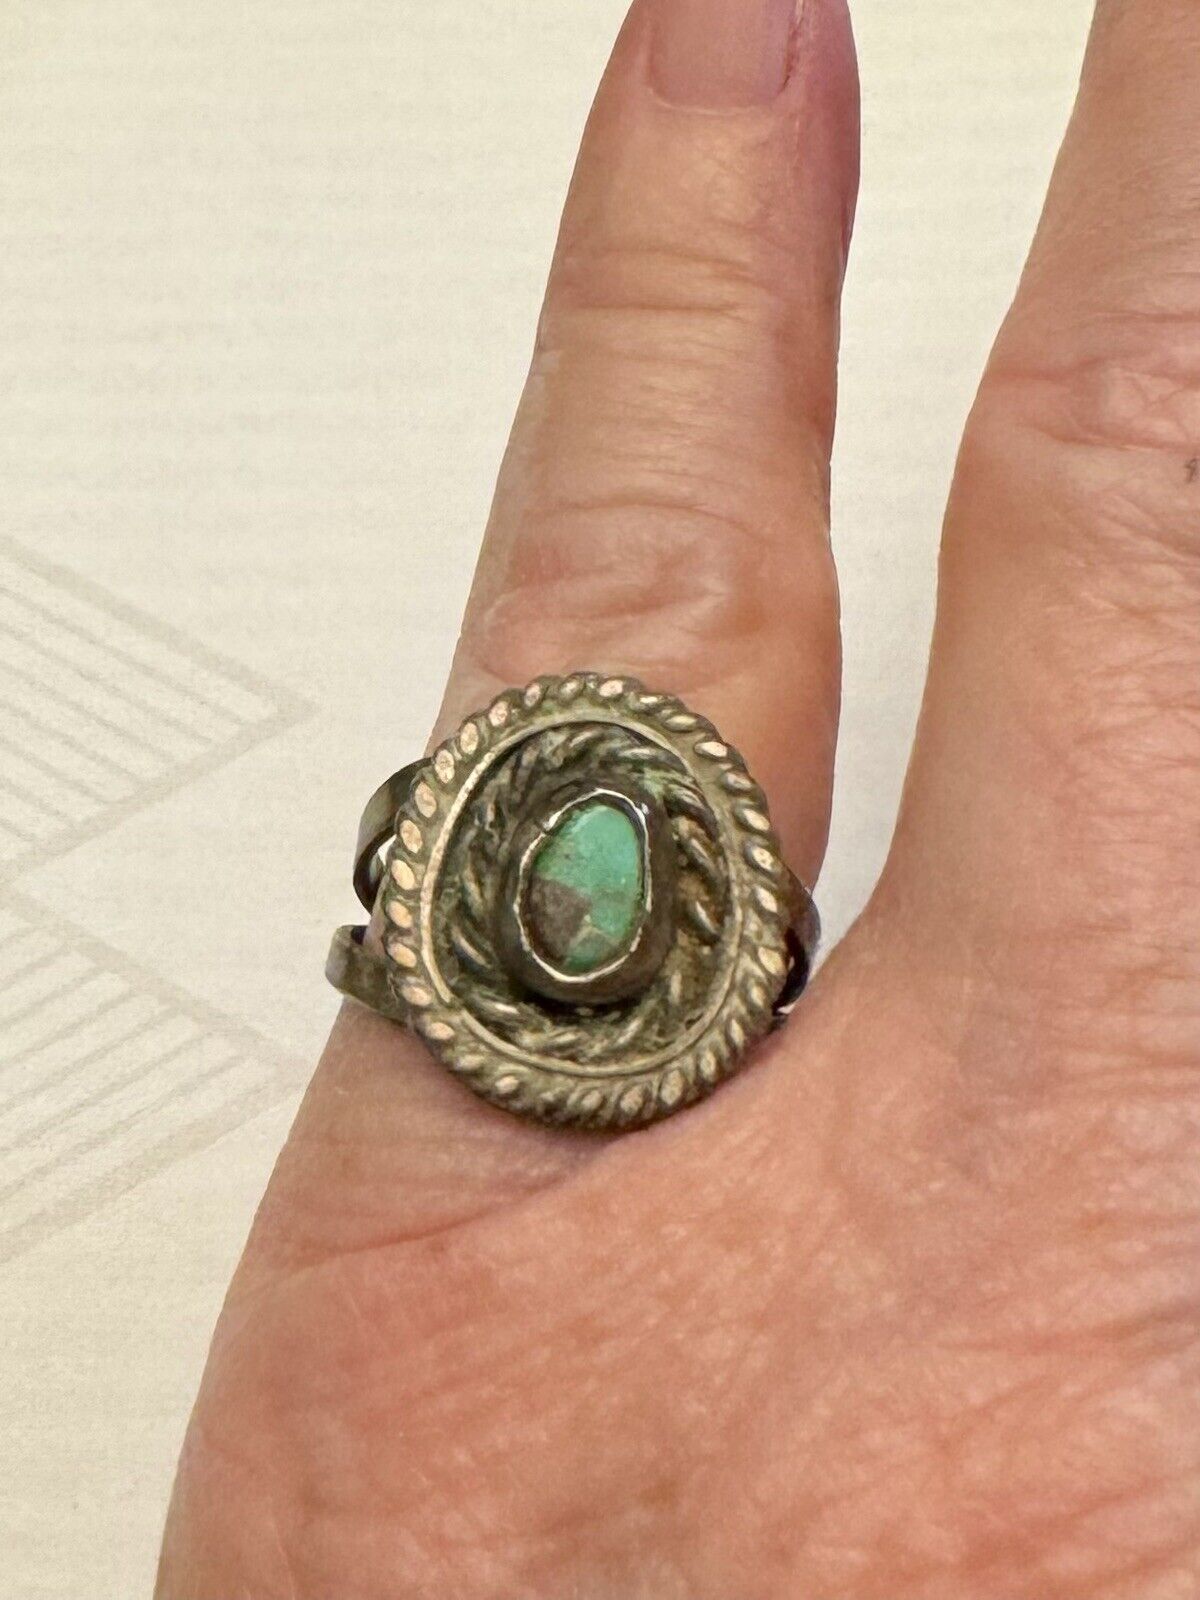 Vintage Old Pawn Handmade Navajo Turquoise Sterling Silver Ring Size 6.25